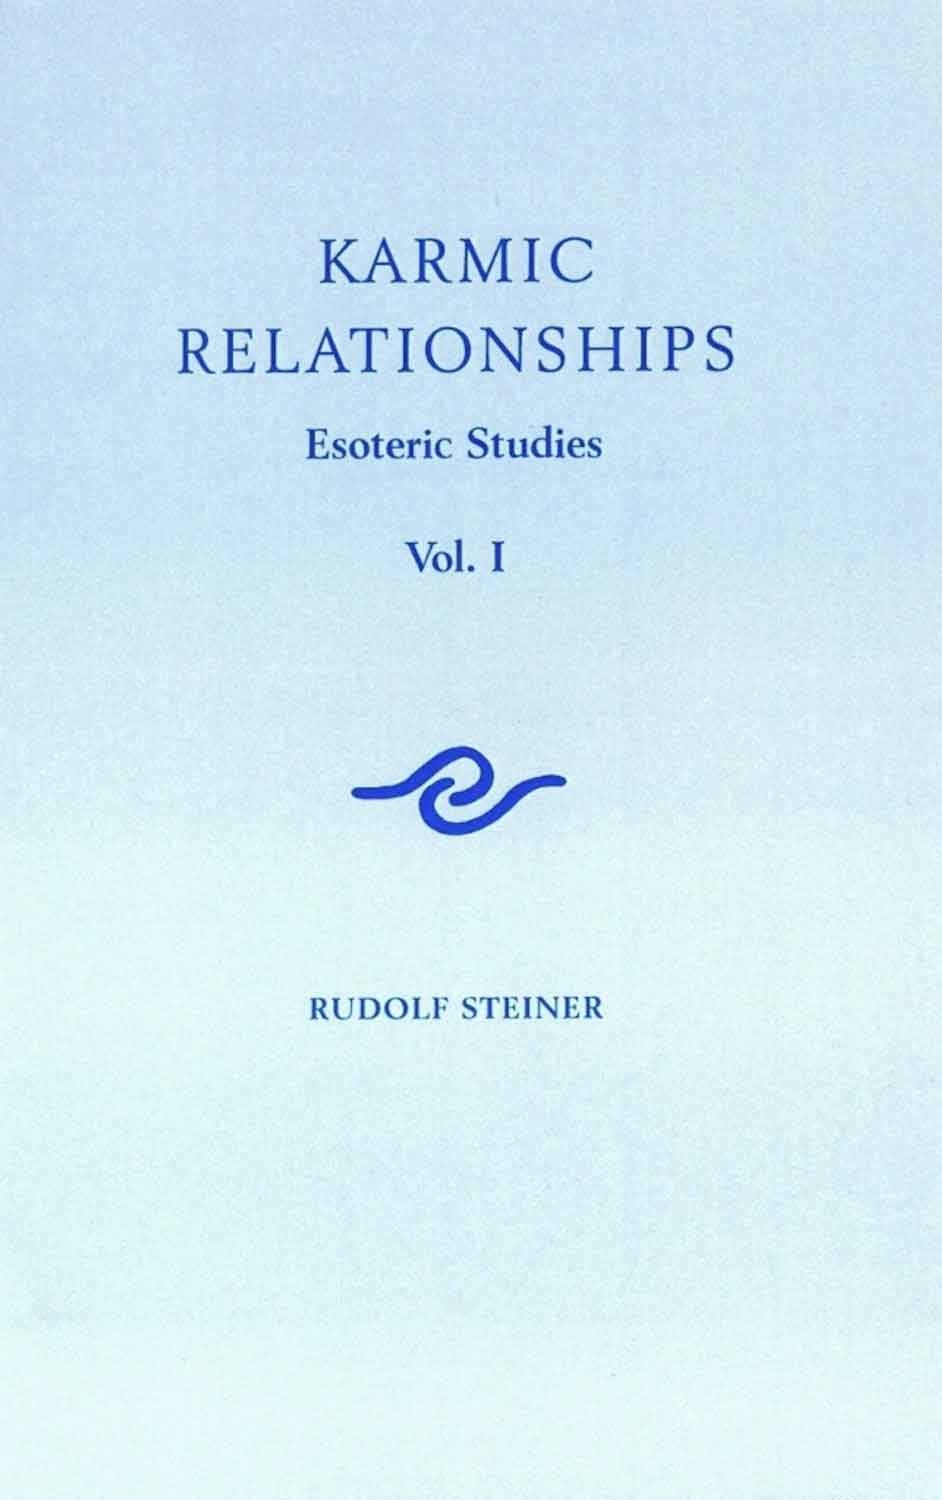 Episode 62: Lecture 62: Karmic Relationships given on August 3 1924 by Rudolf Steiner